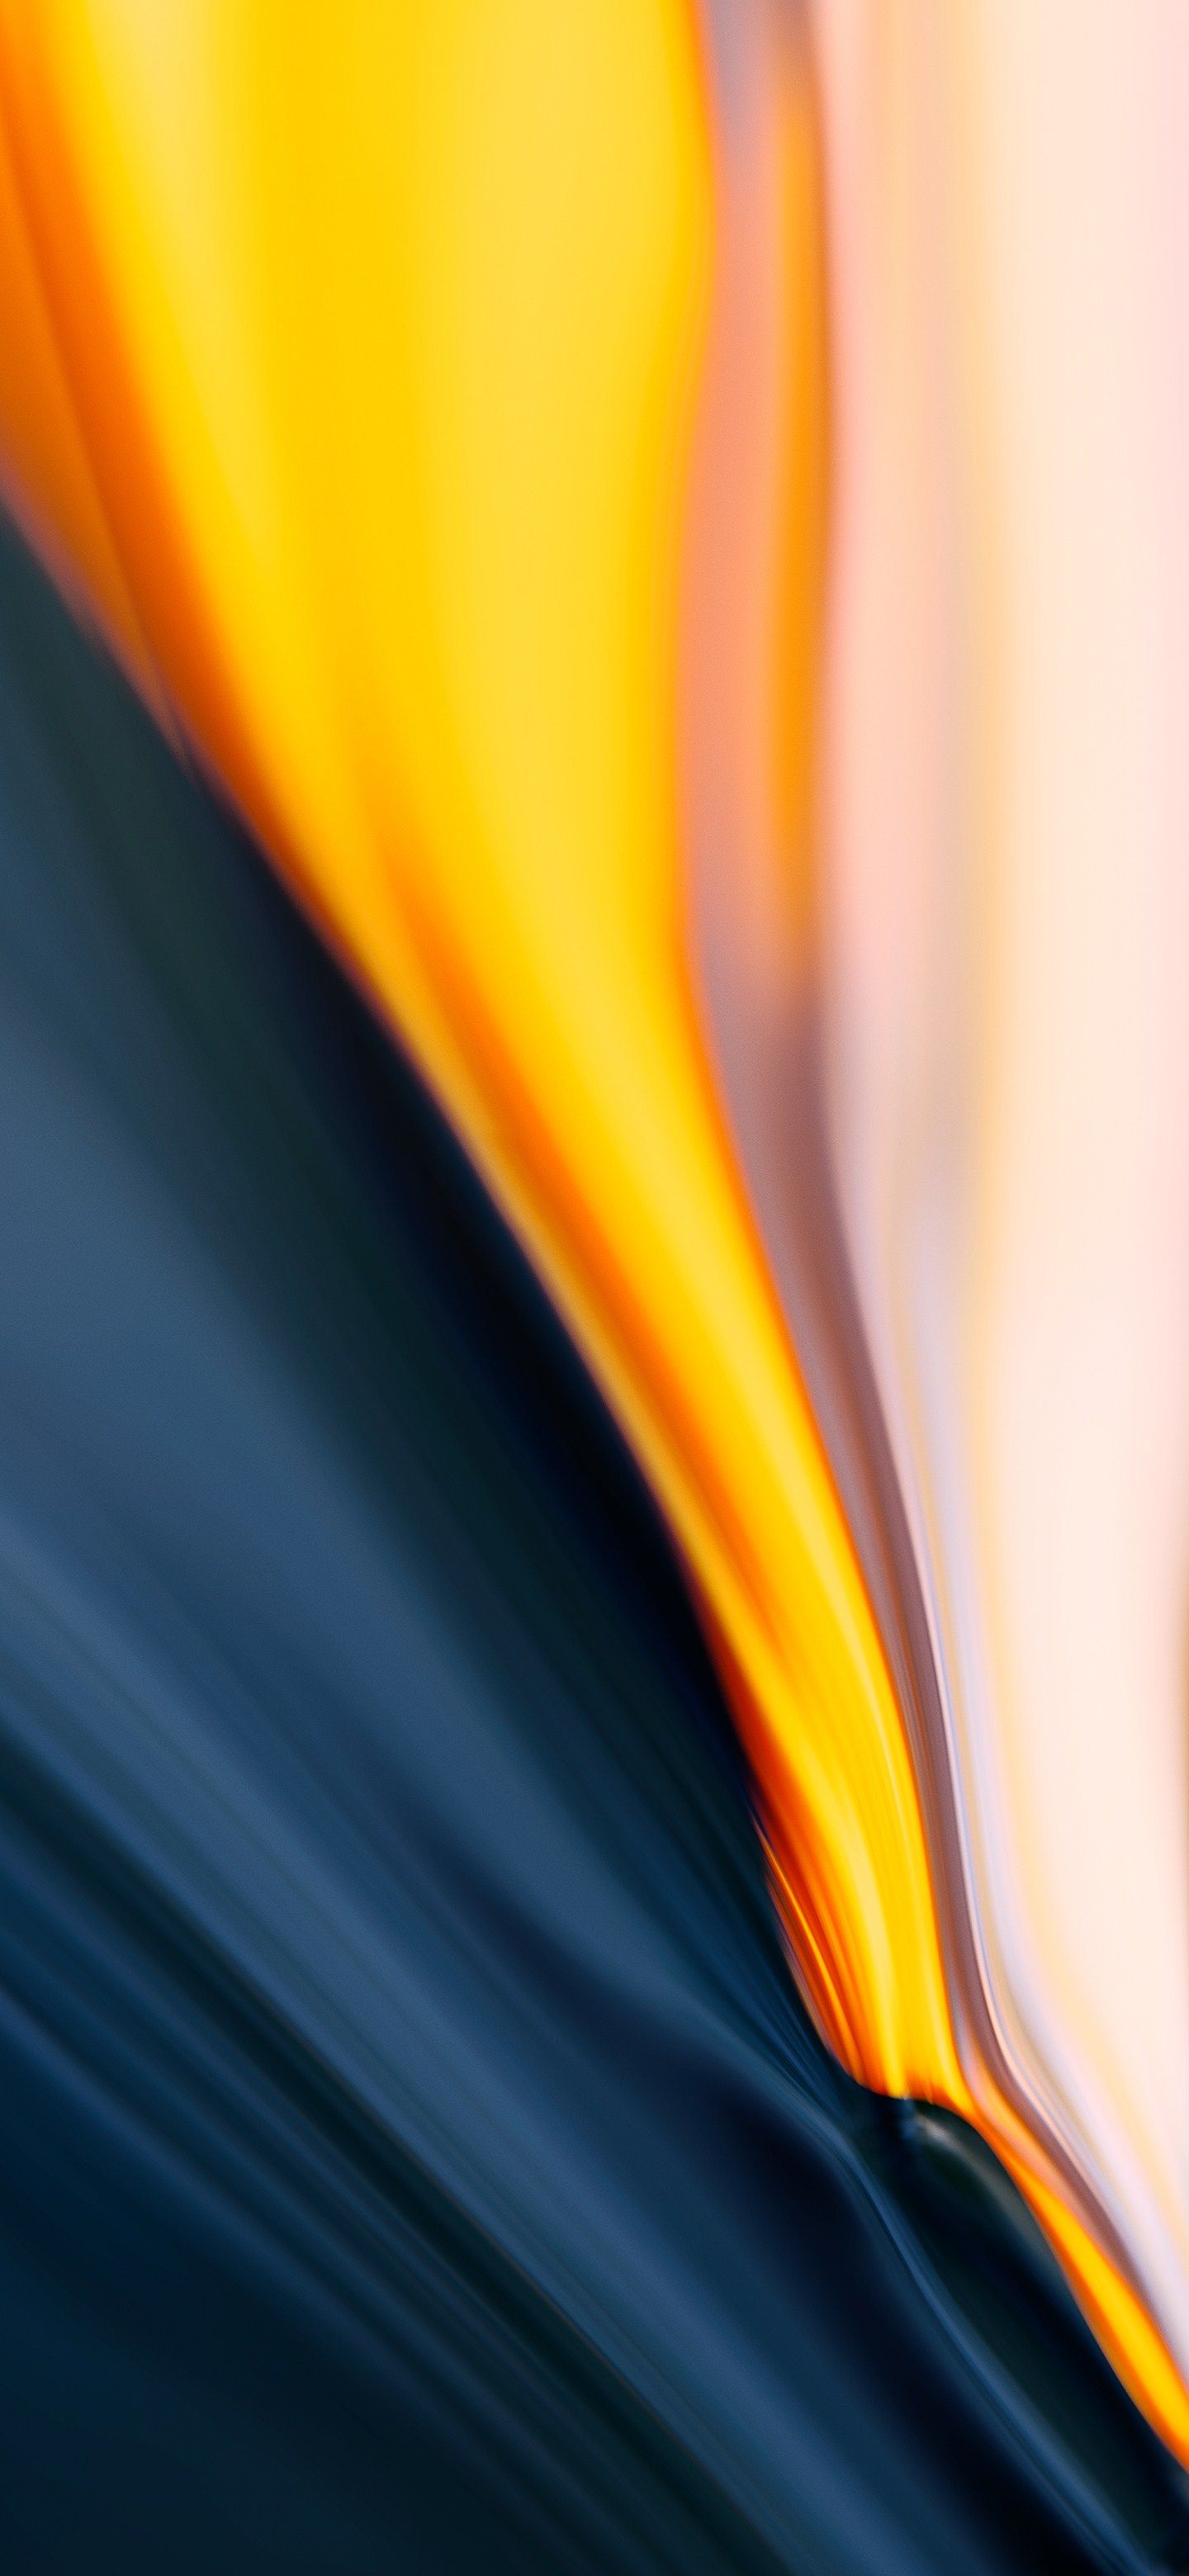 Oneplus 7 Pro Abstract Official Wallpaper 7 Pro